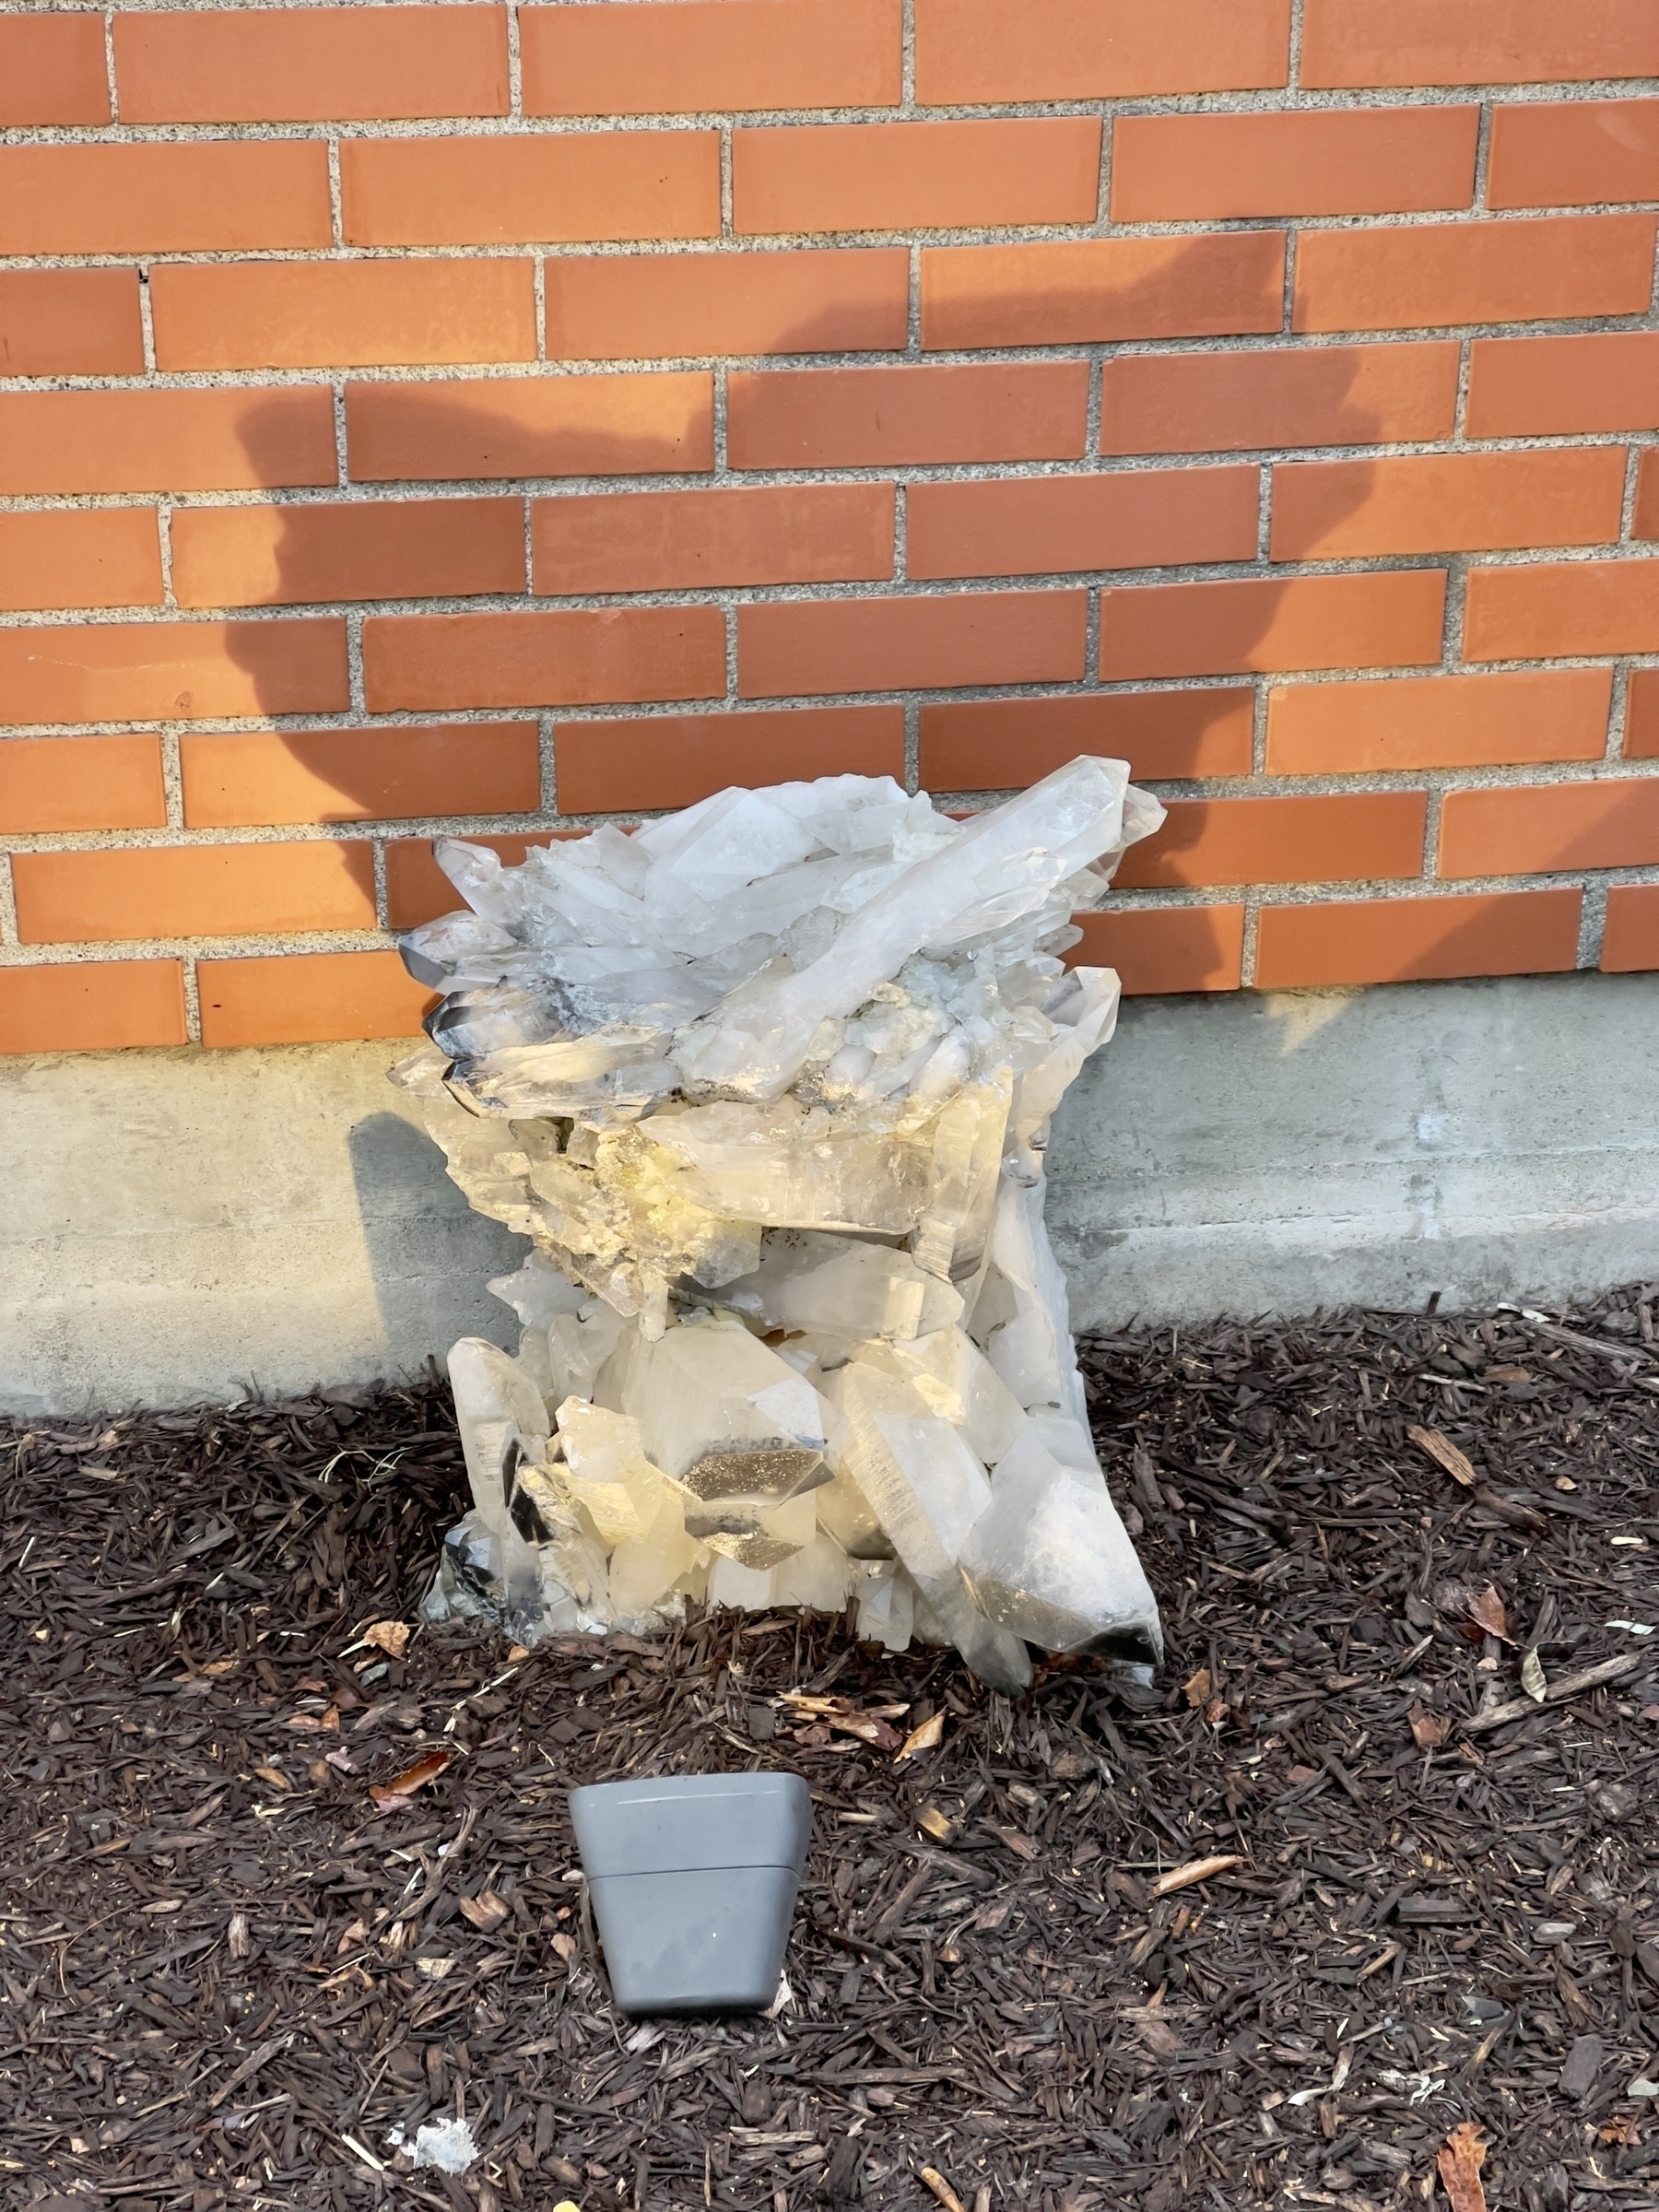 Large mass of crystals with shadow by the brick wall of a building.